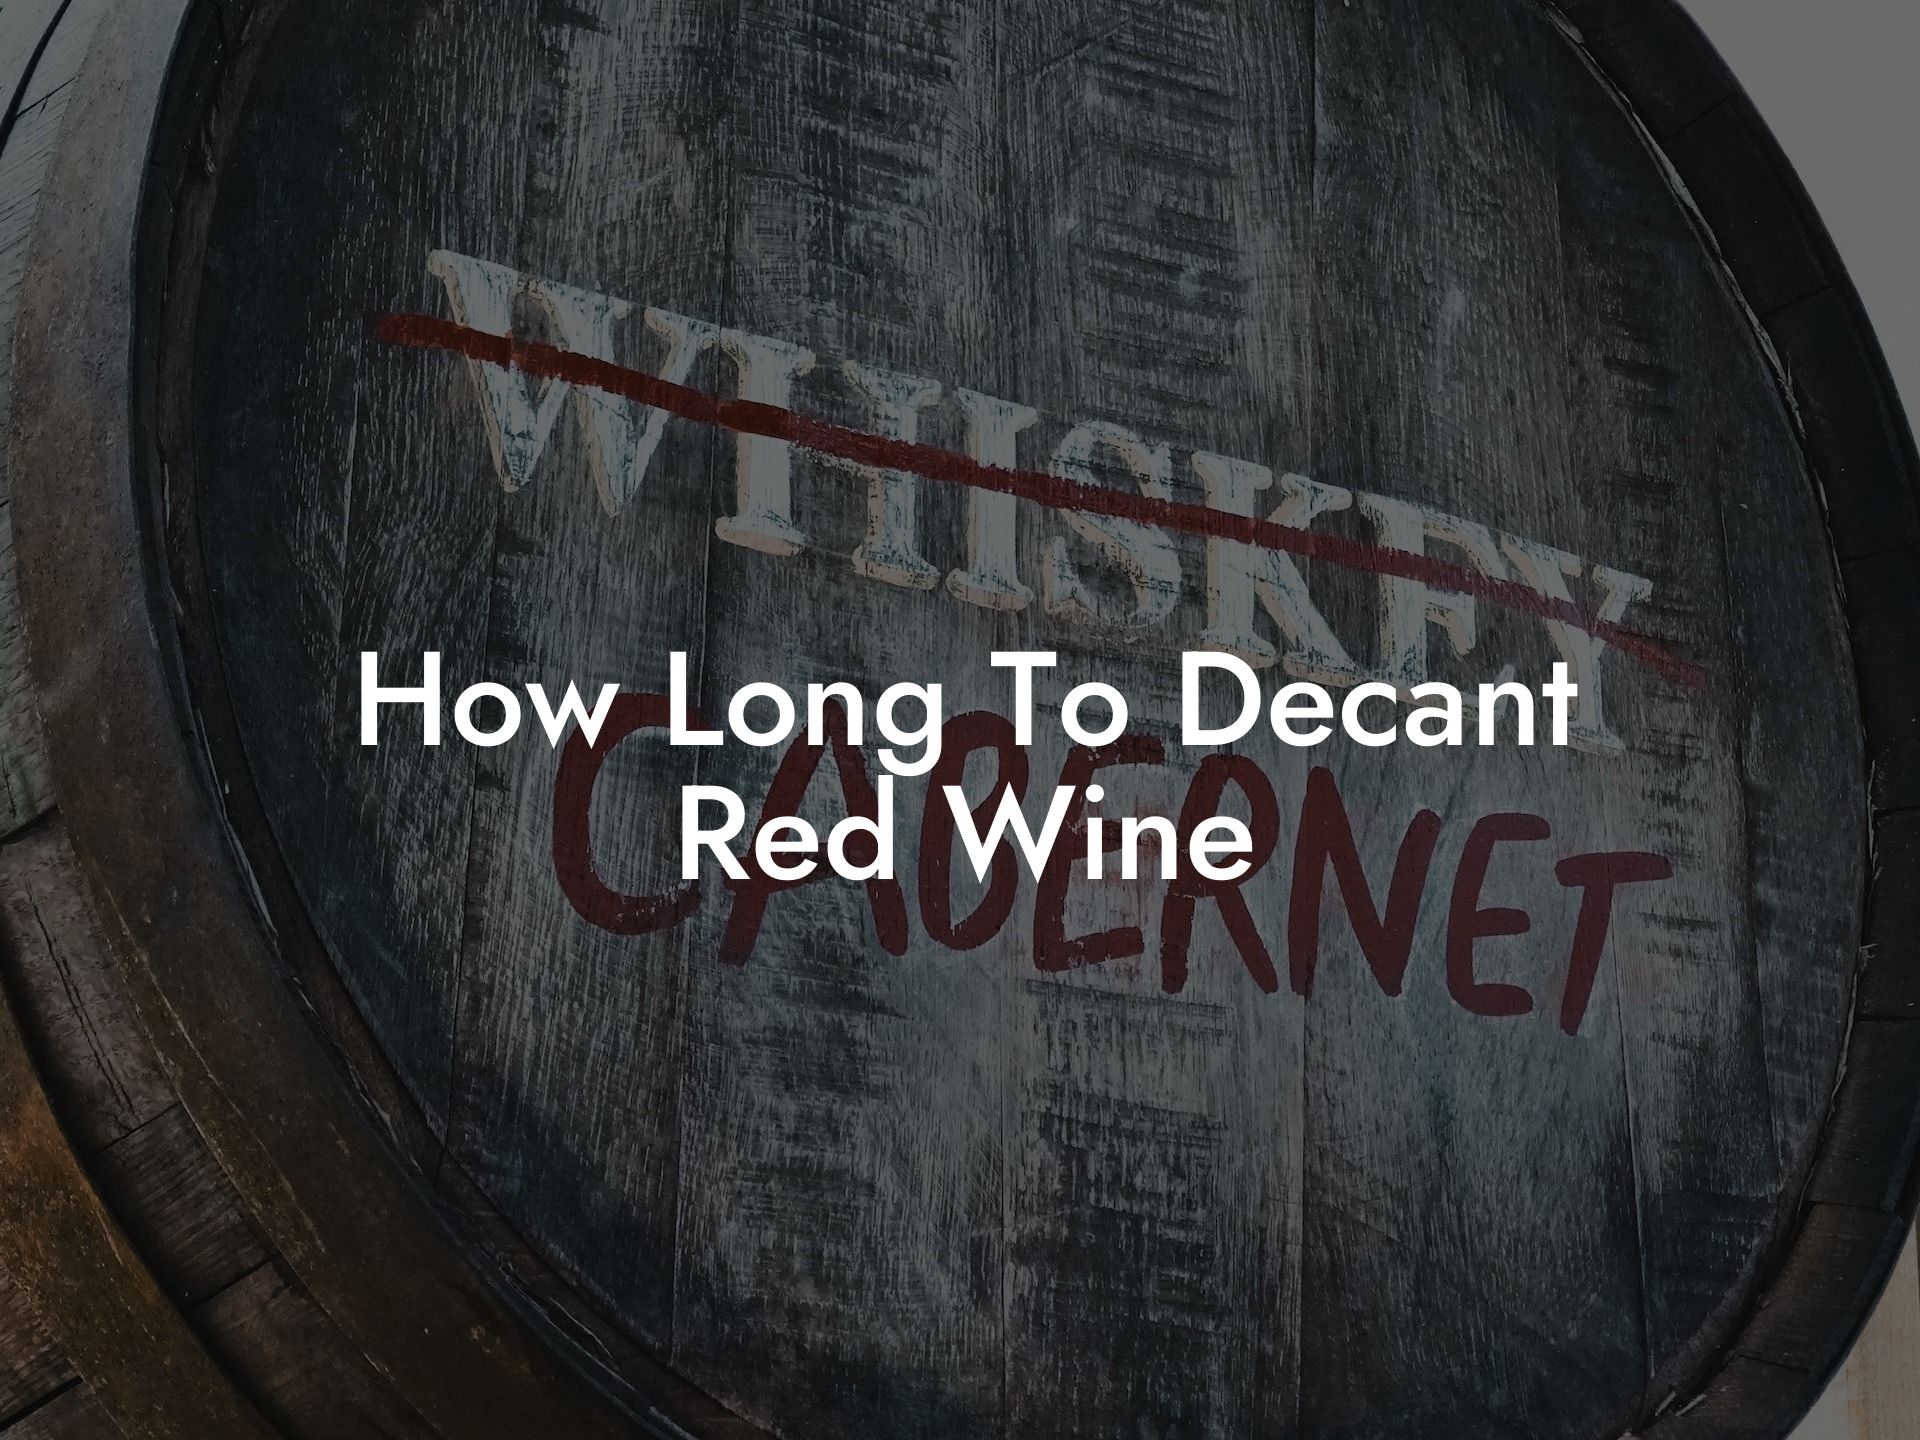 How Long To Decant Red Wine